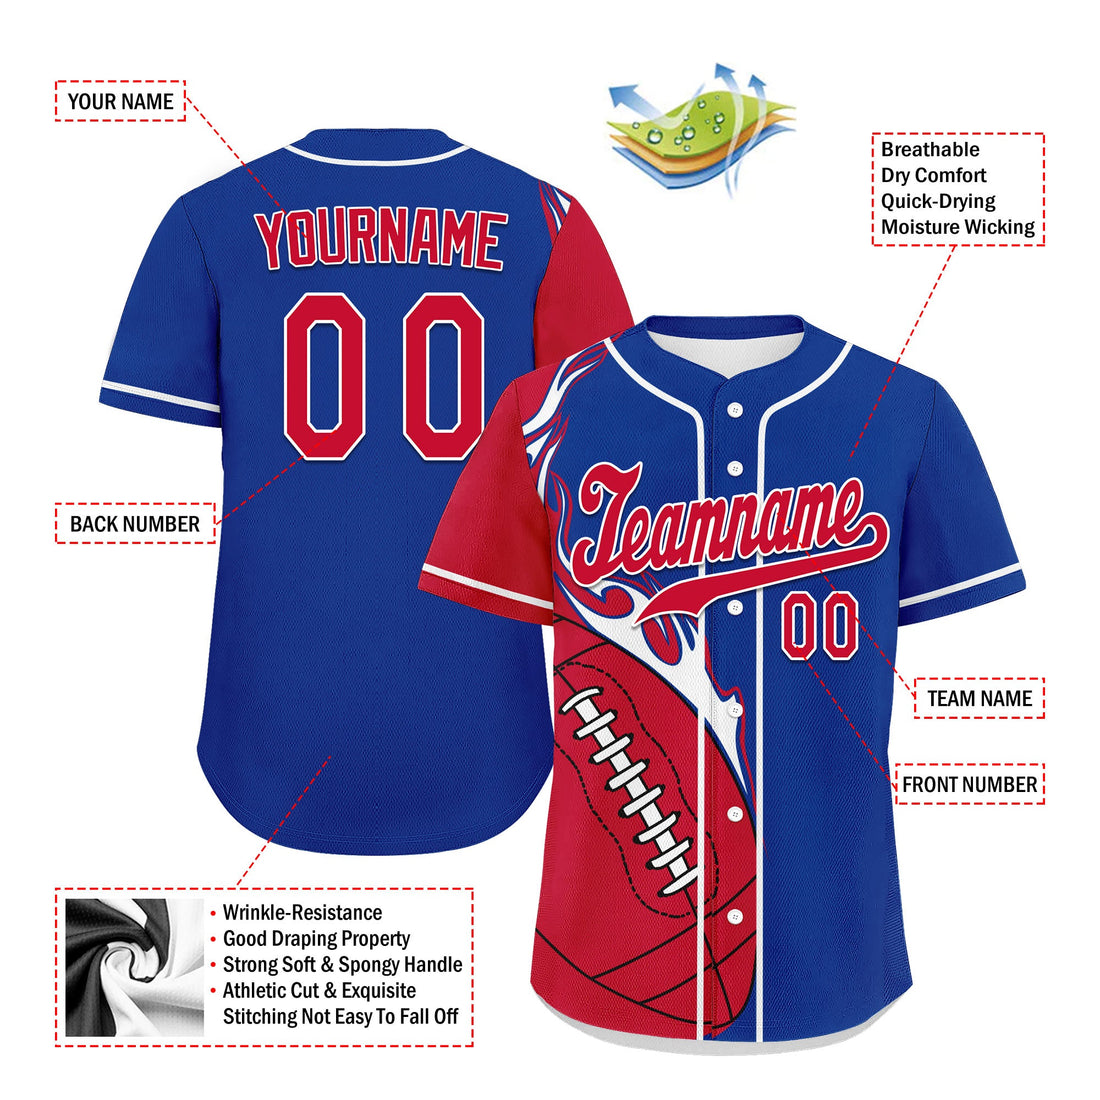 Custom Blue Red Classic Style Personalized Authentic Baseball Jersey UN002-D0b0a00-e